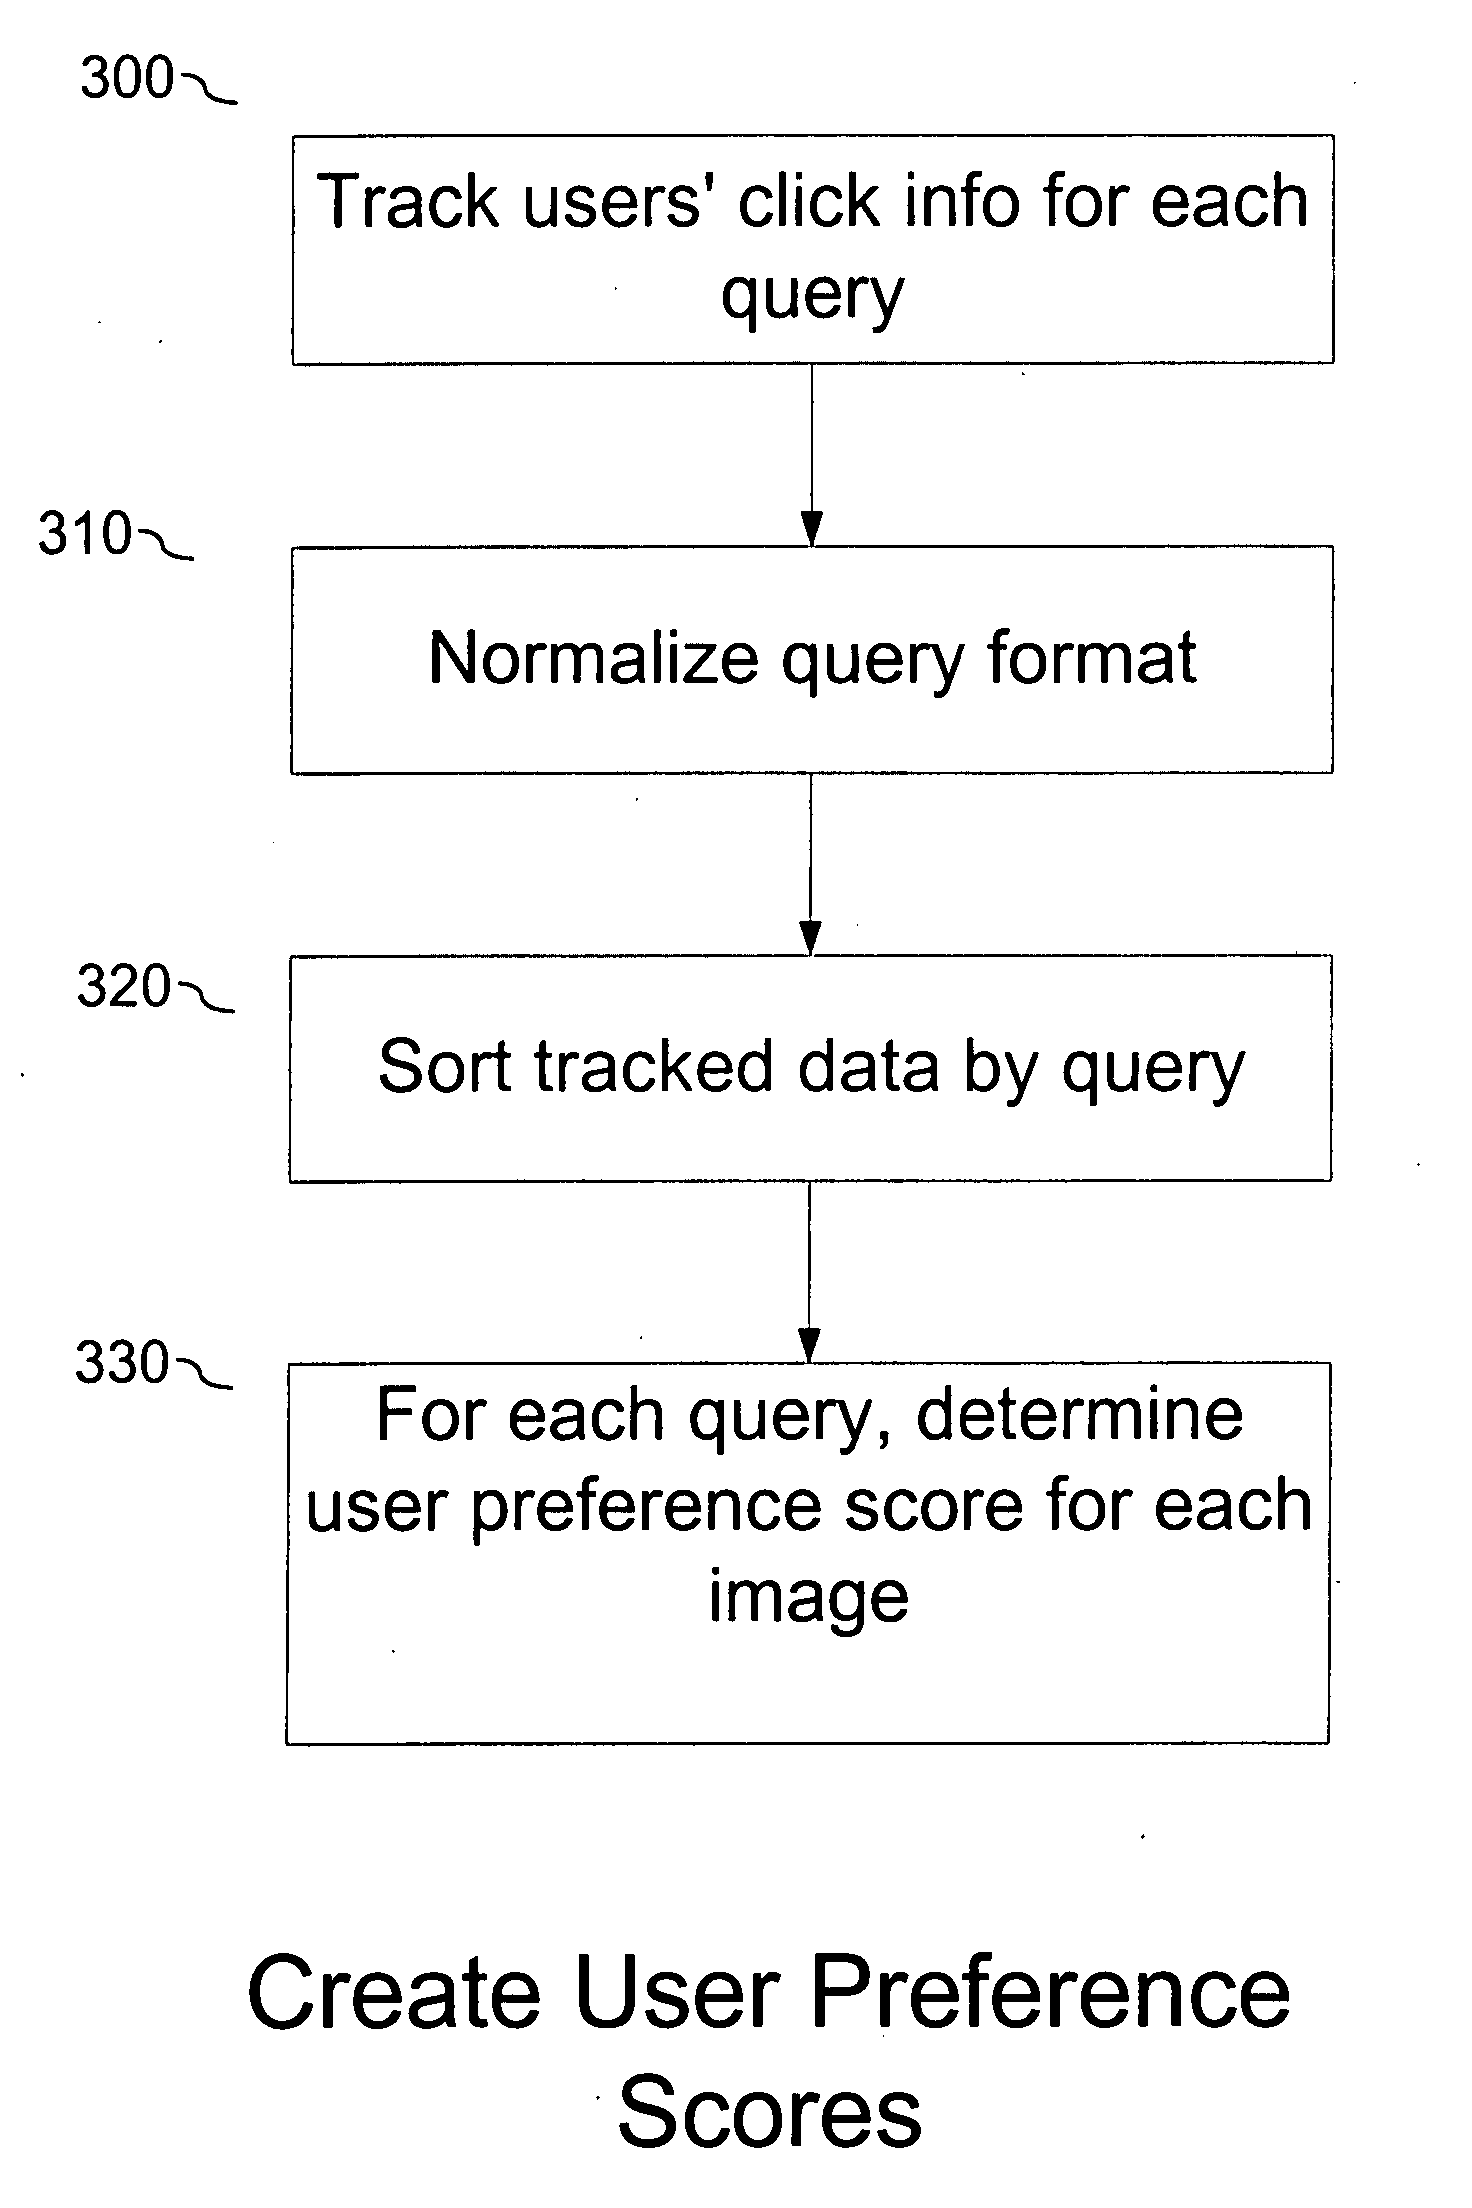 Click-through re-ranking of images and other data